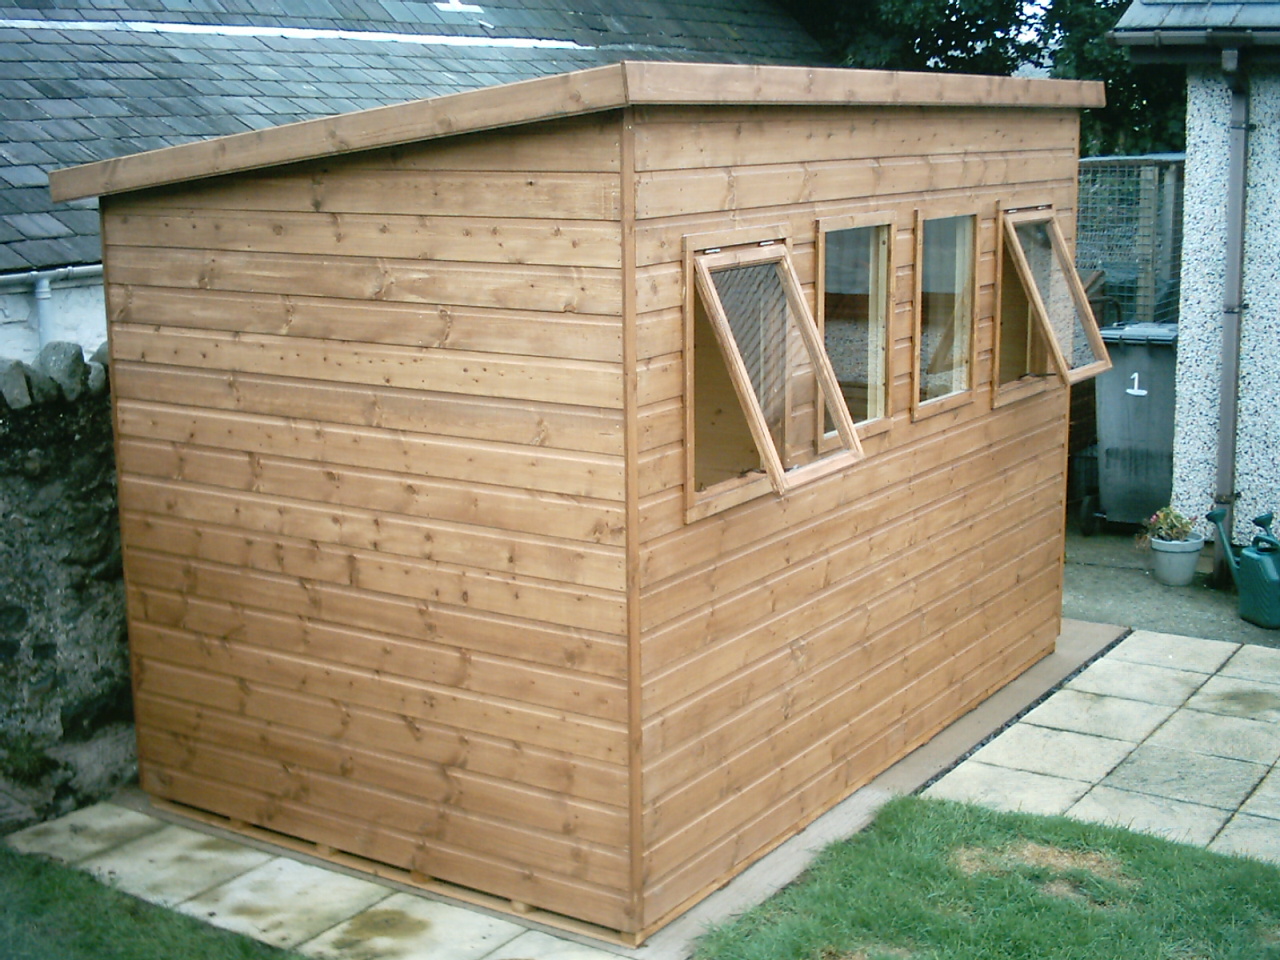 Garden sheds: Plans for a pent shed